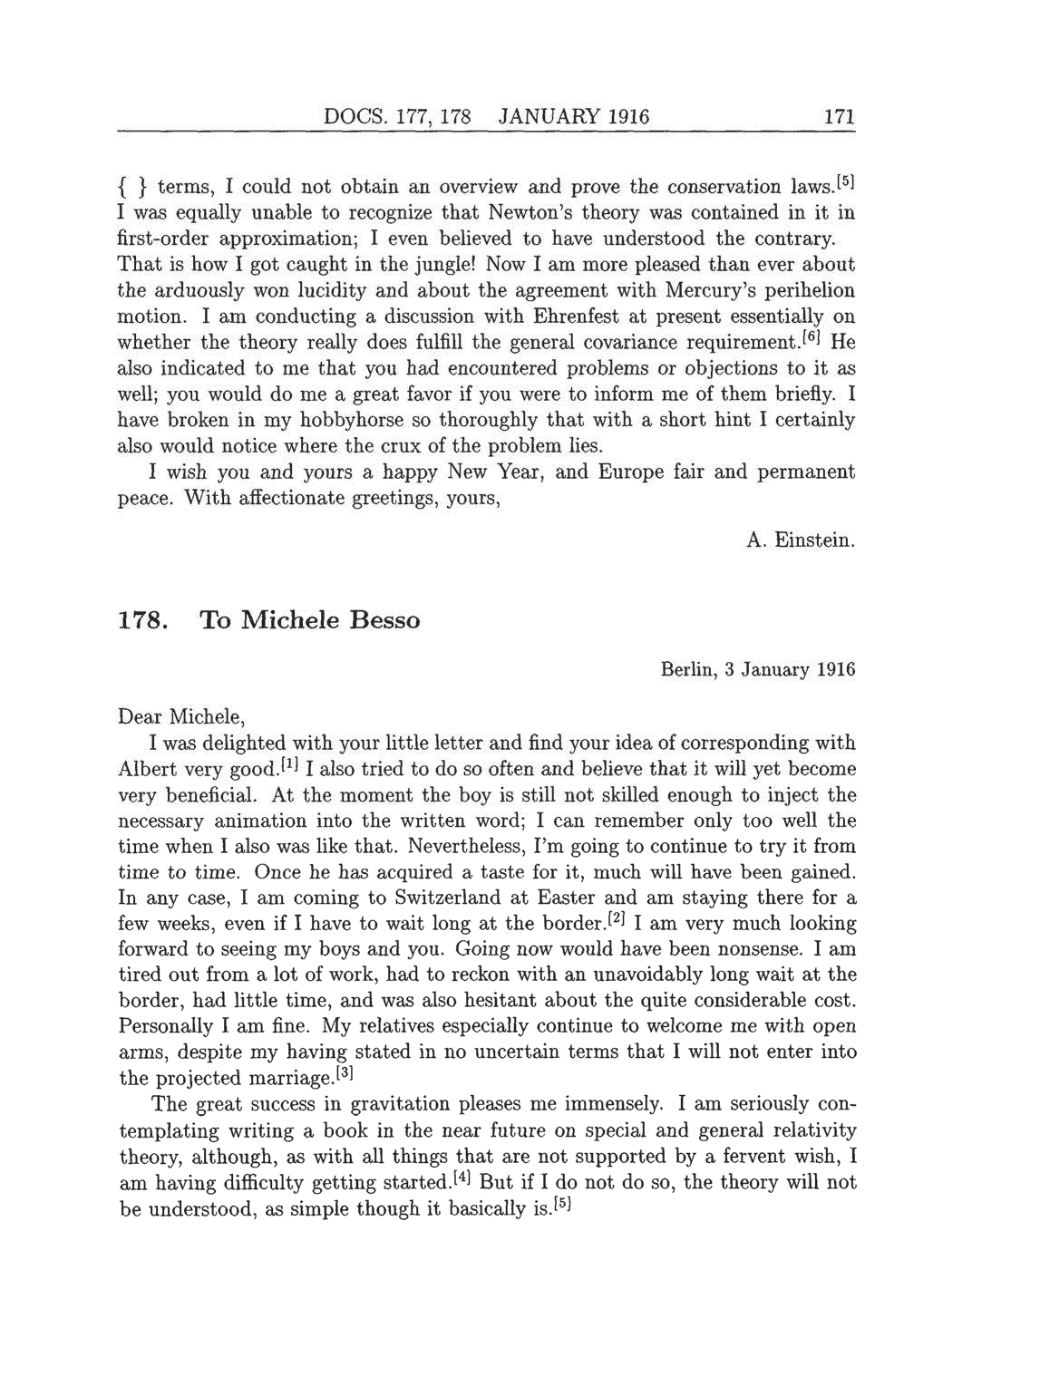 Volume 8: The Berlin Years: Correspondence, 1914-1918 (English translation supplement) page 171